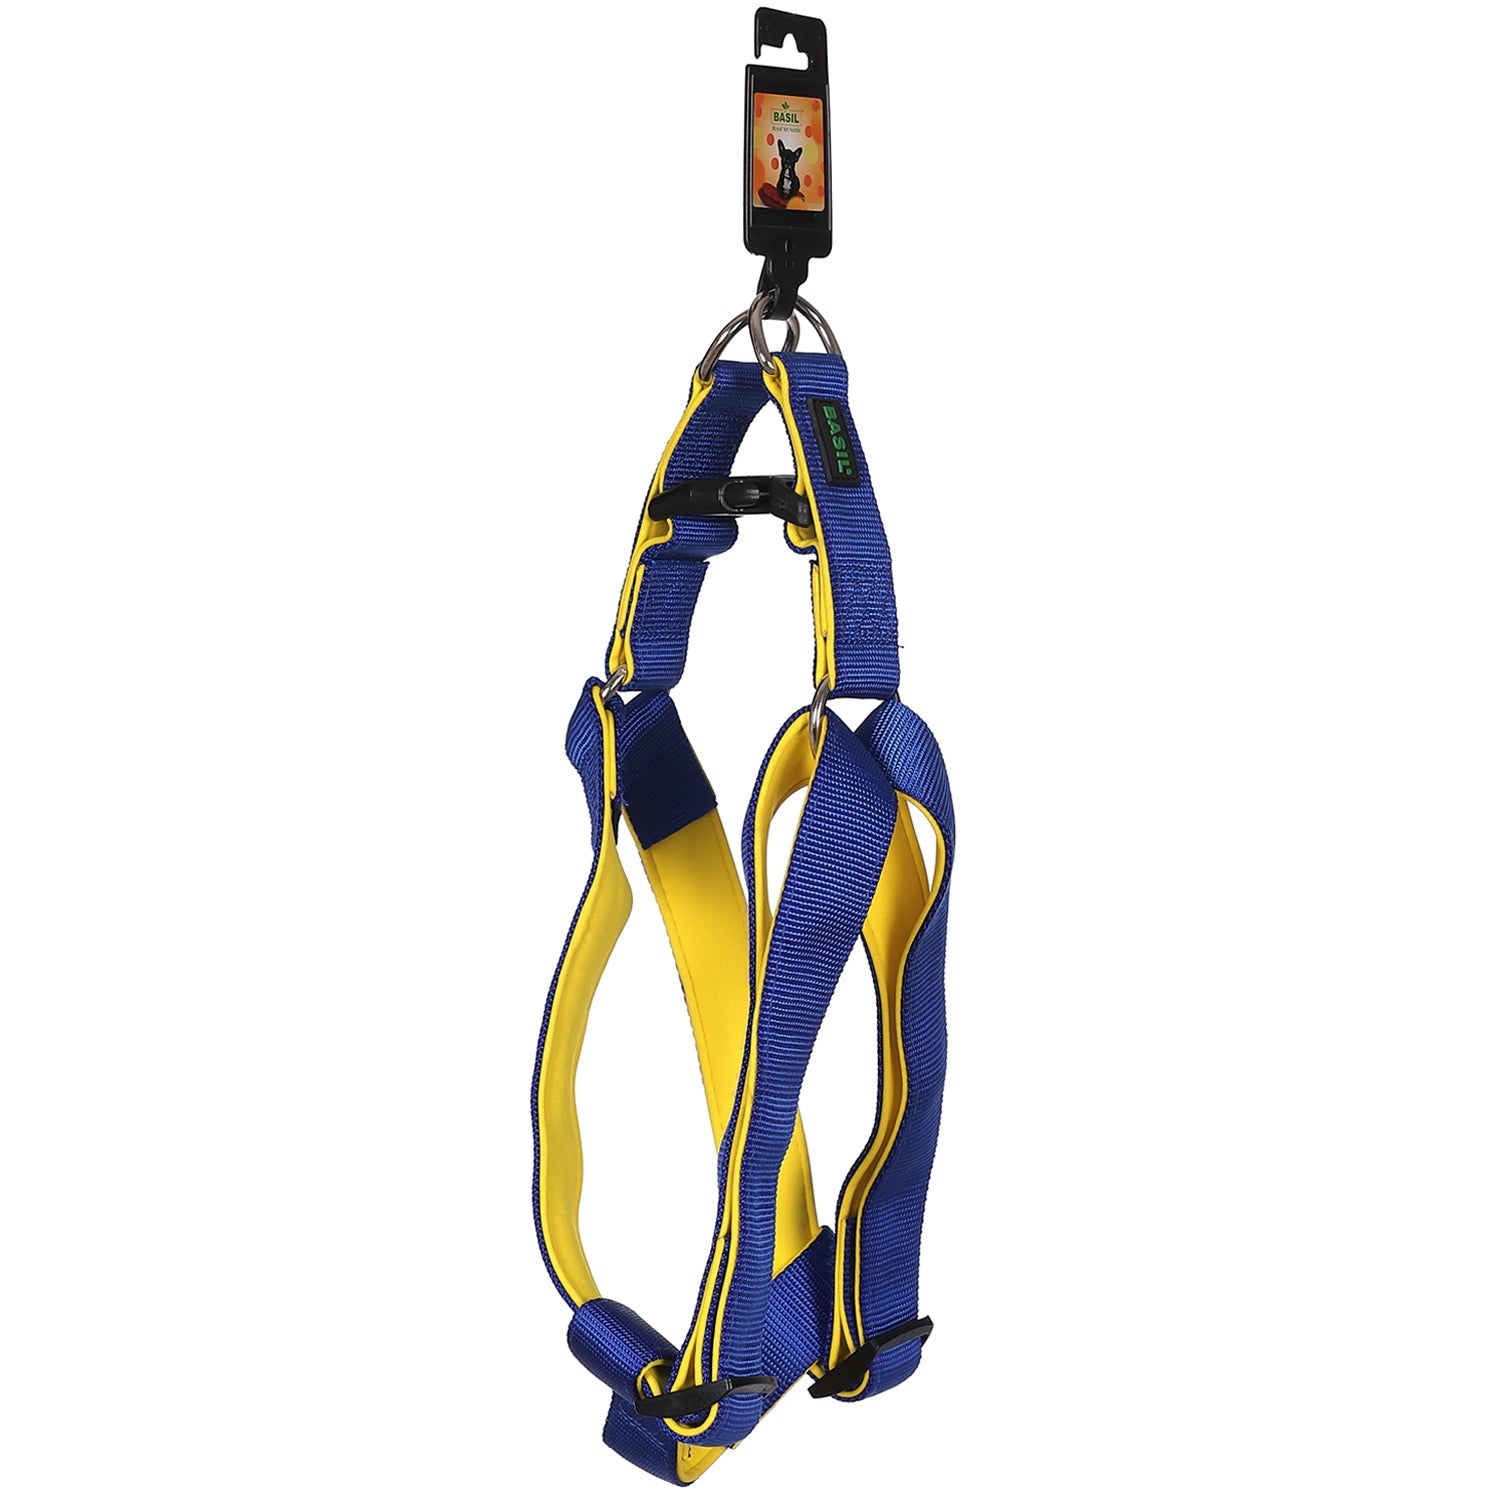 Padded Adjustable Harness for Dogs & Puppies (Blue)